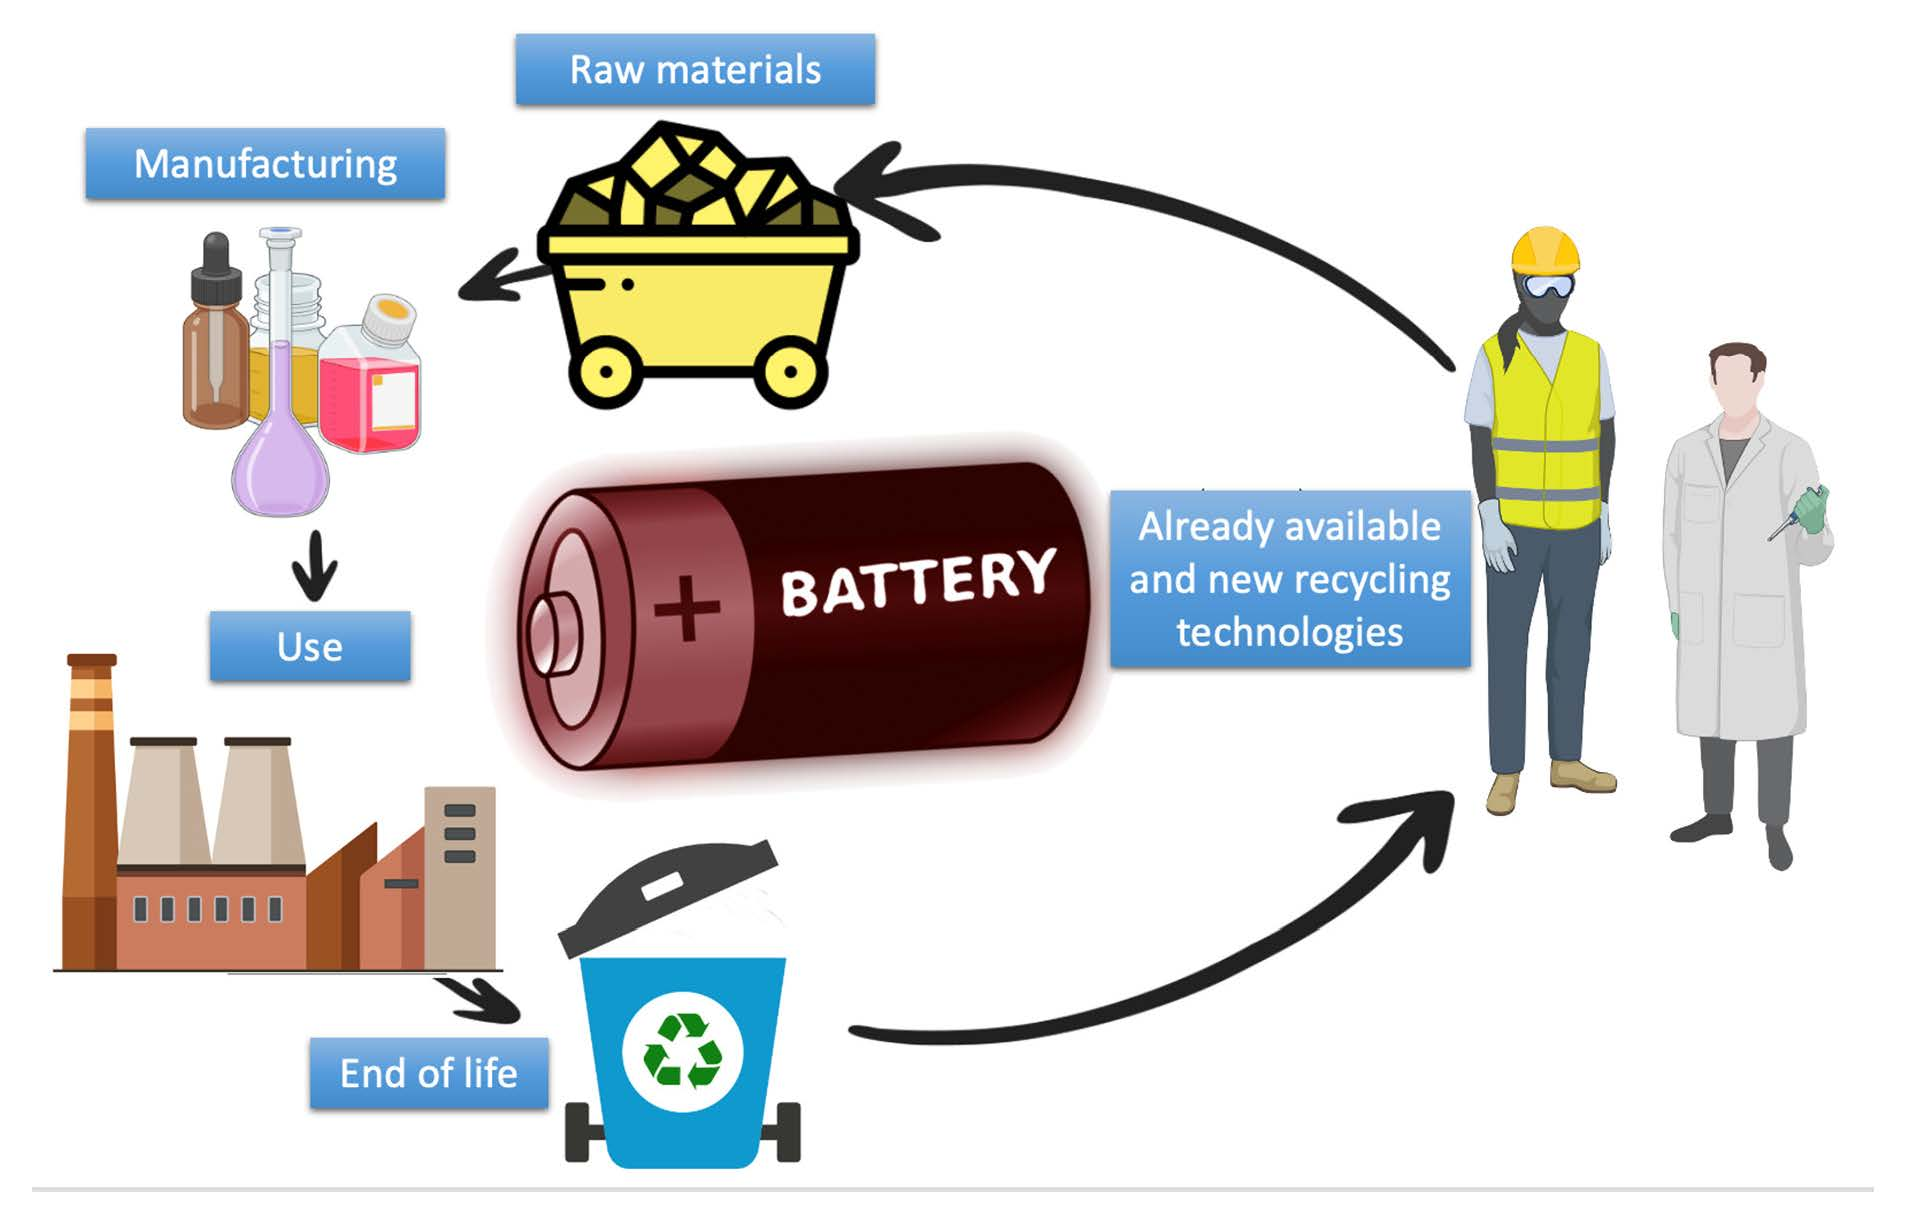 Automotive Li-Ion Batteries: Current Status and Future Perspectives